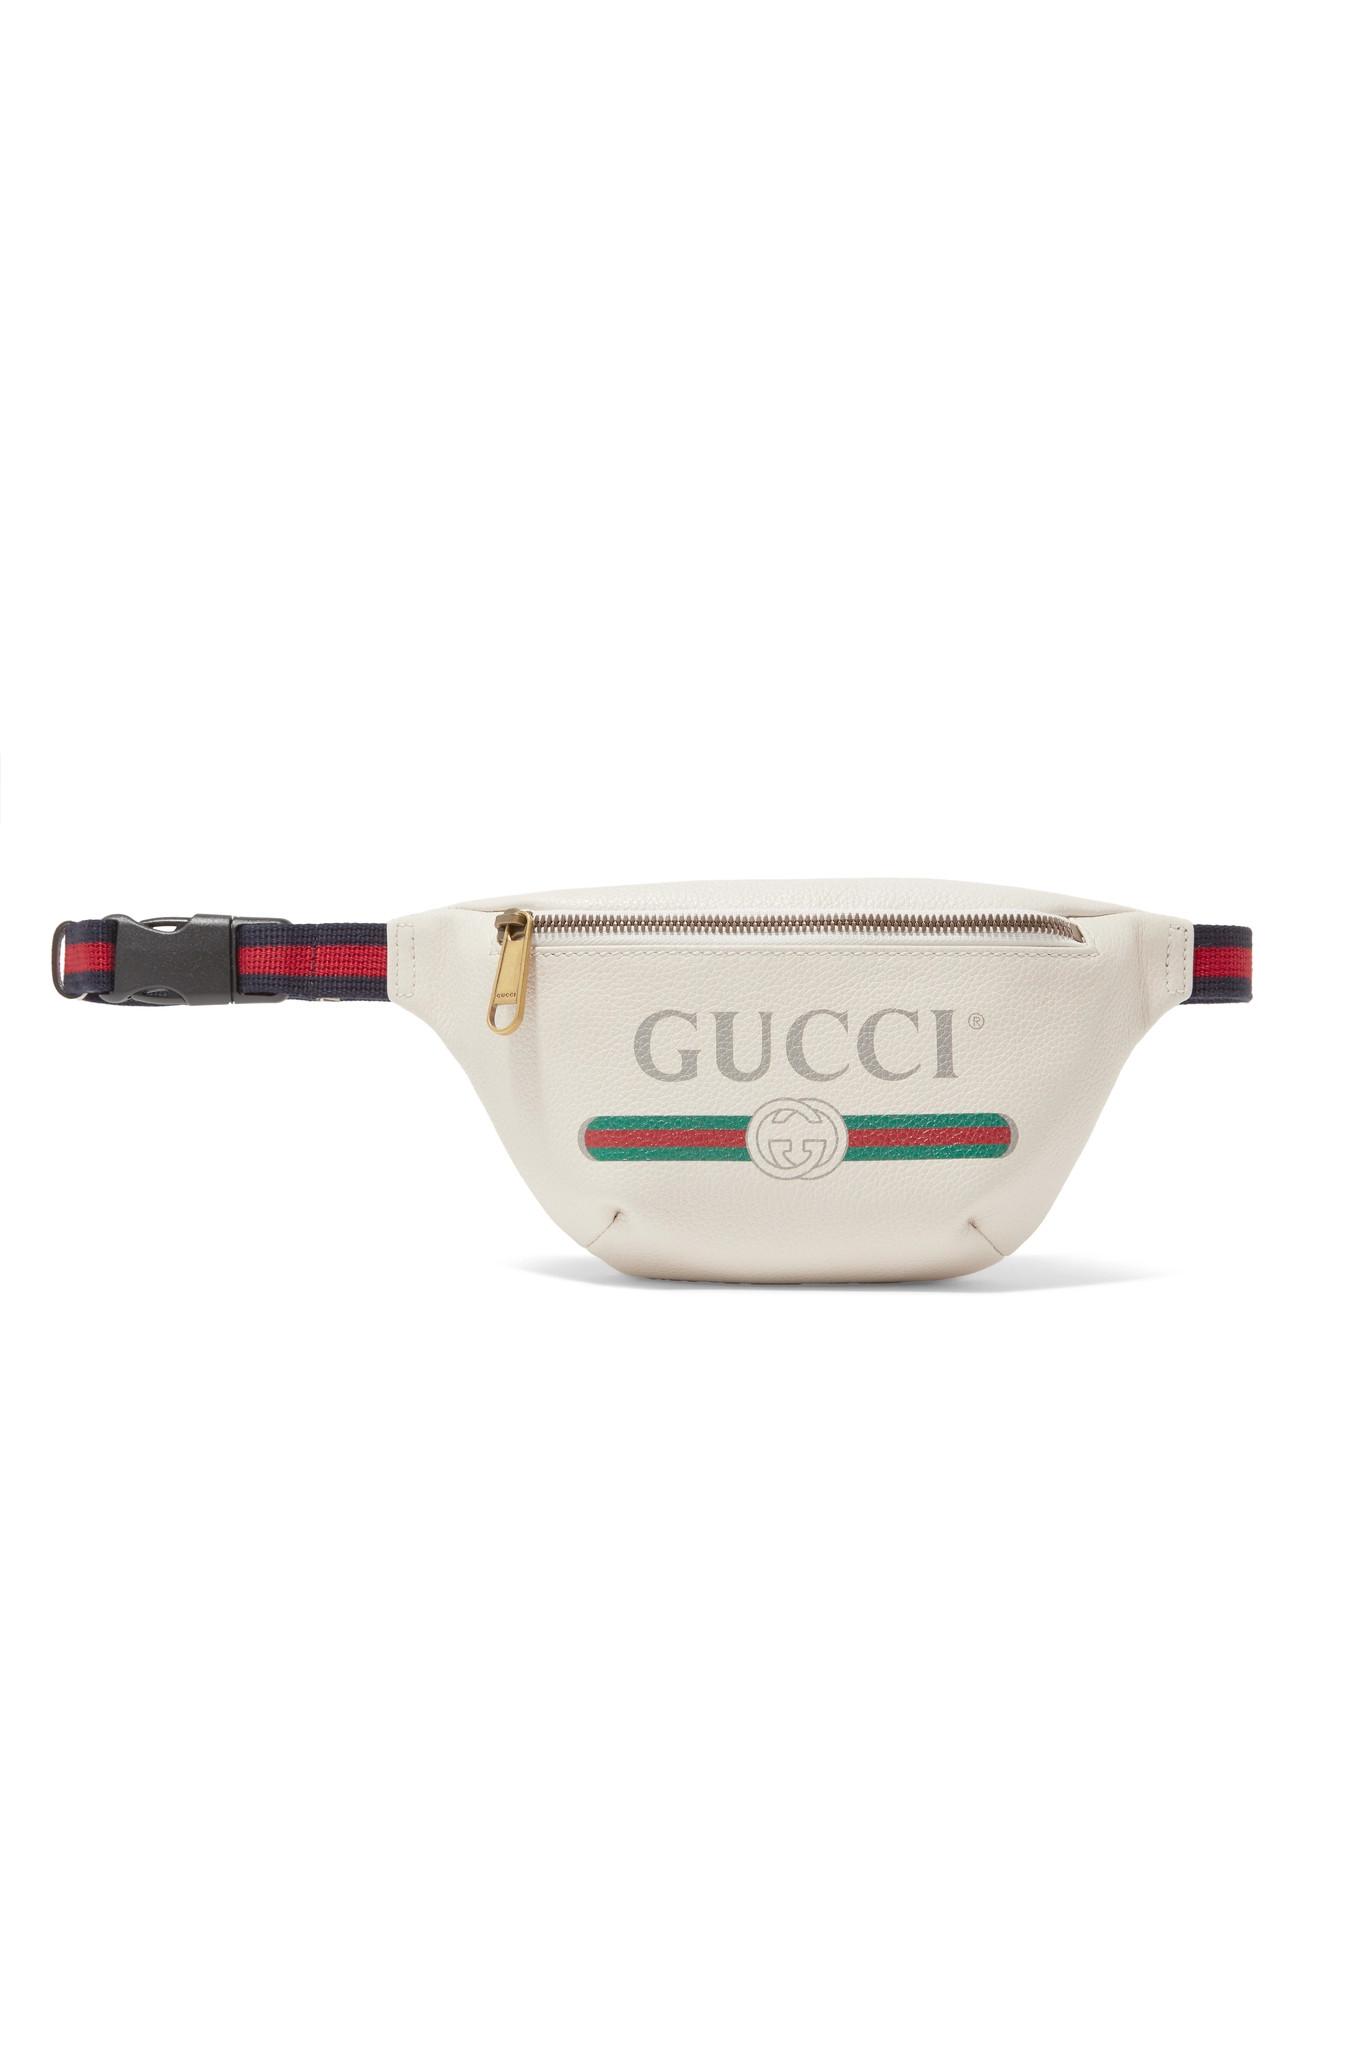 Lyst - Gucci Printed Textured-leather Belt Bag in White